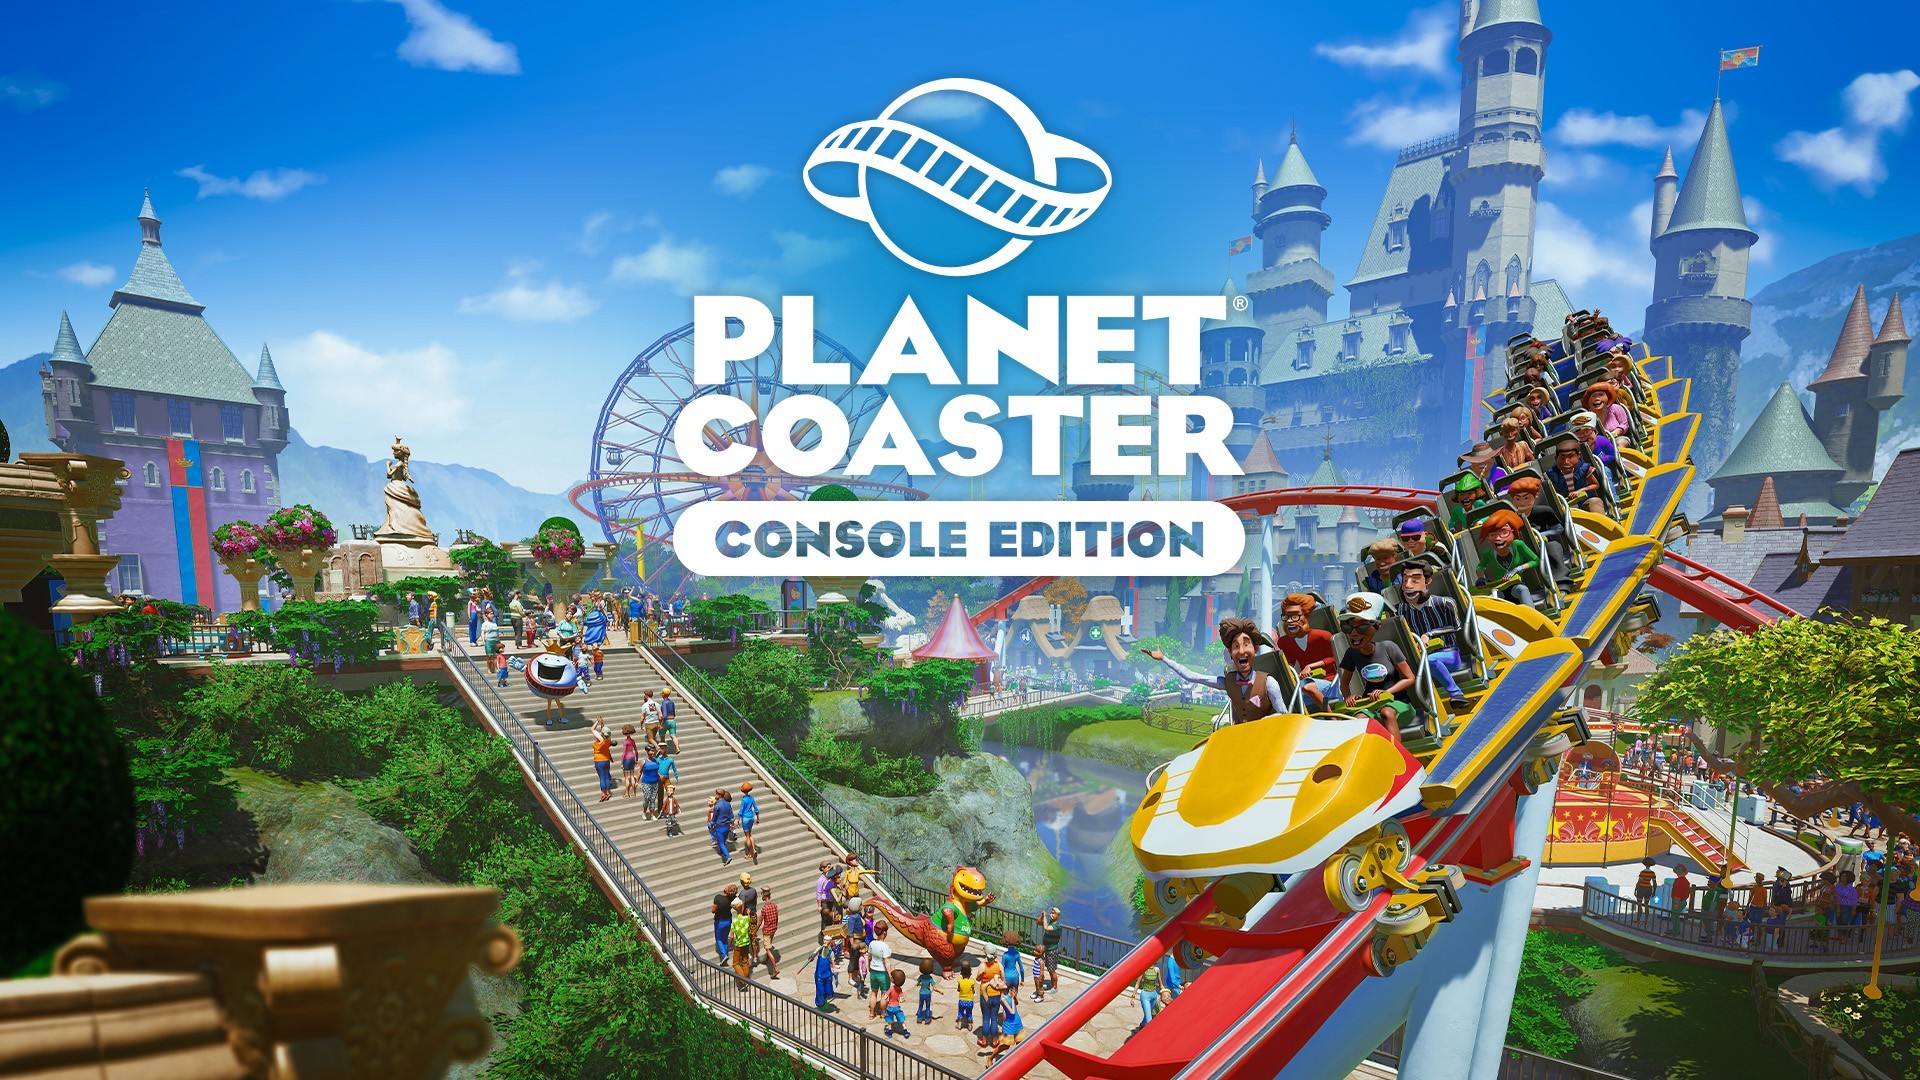 Video For Planet Coaster: Console Edition, Out Now on Xbox Series X|S and Xbox One